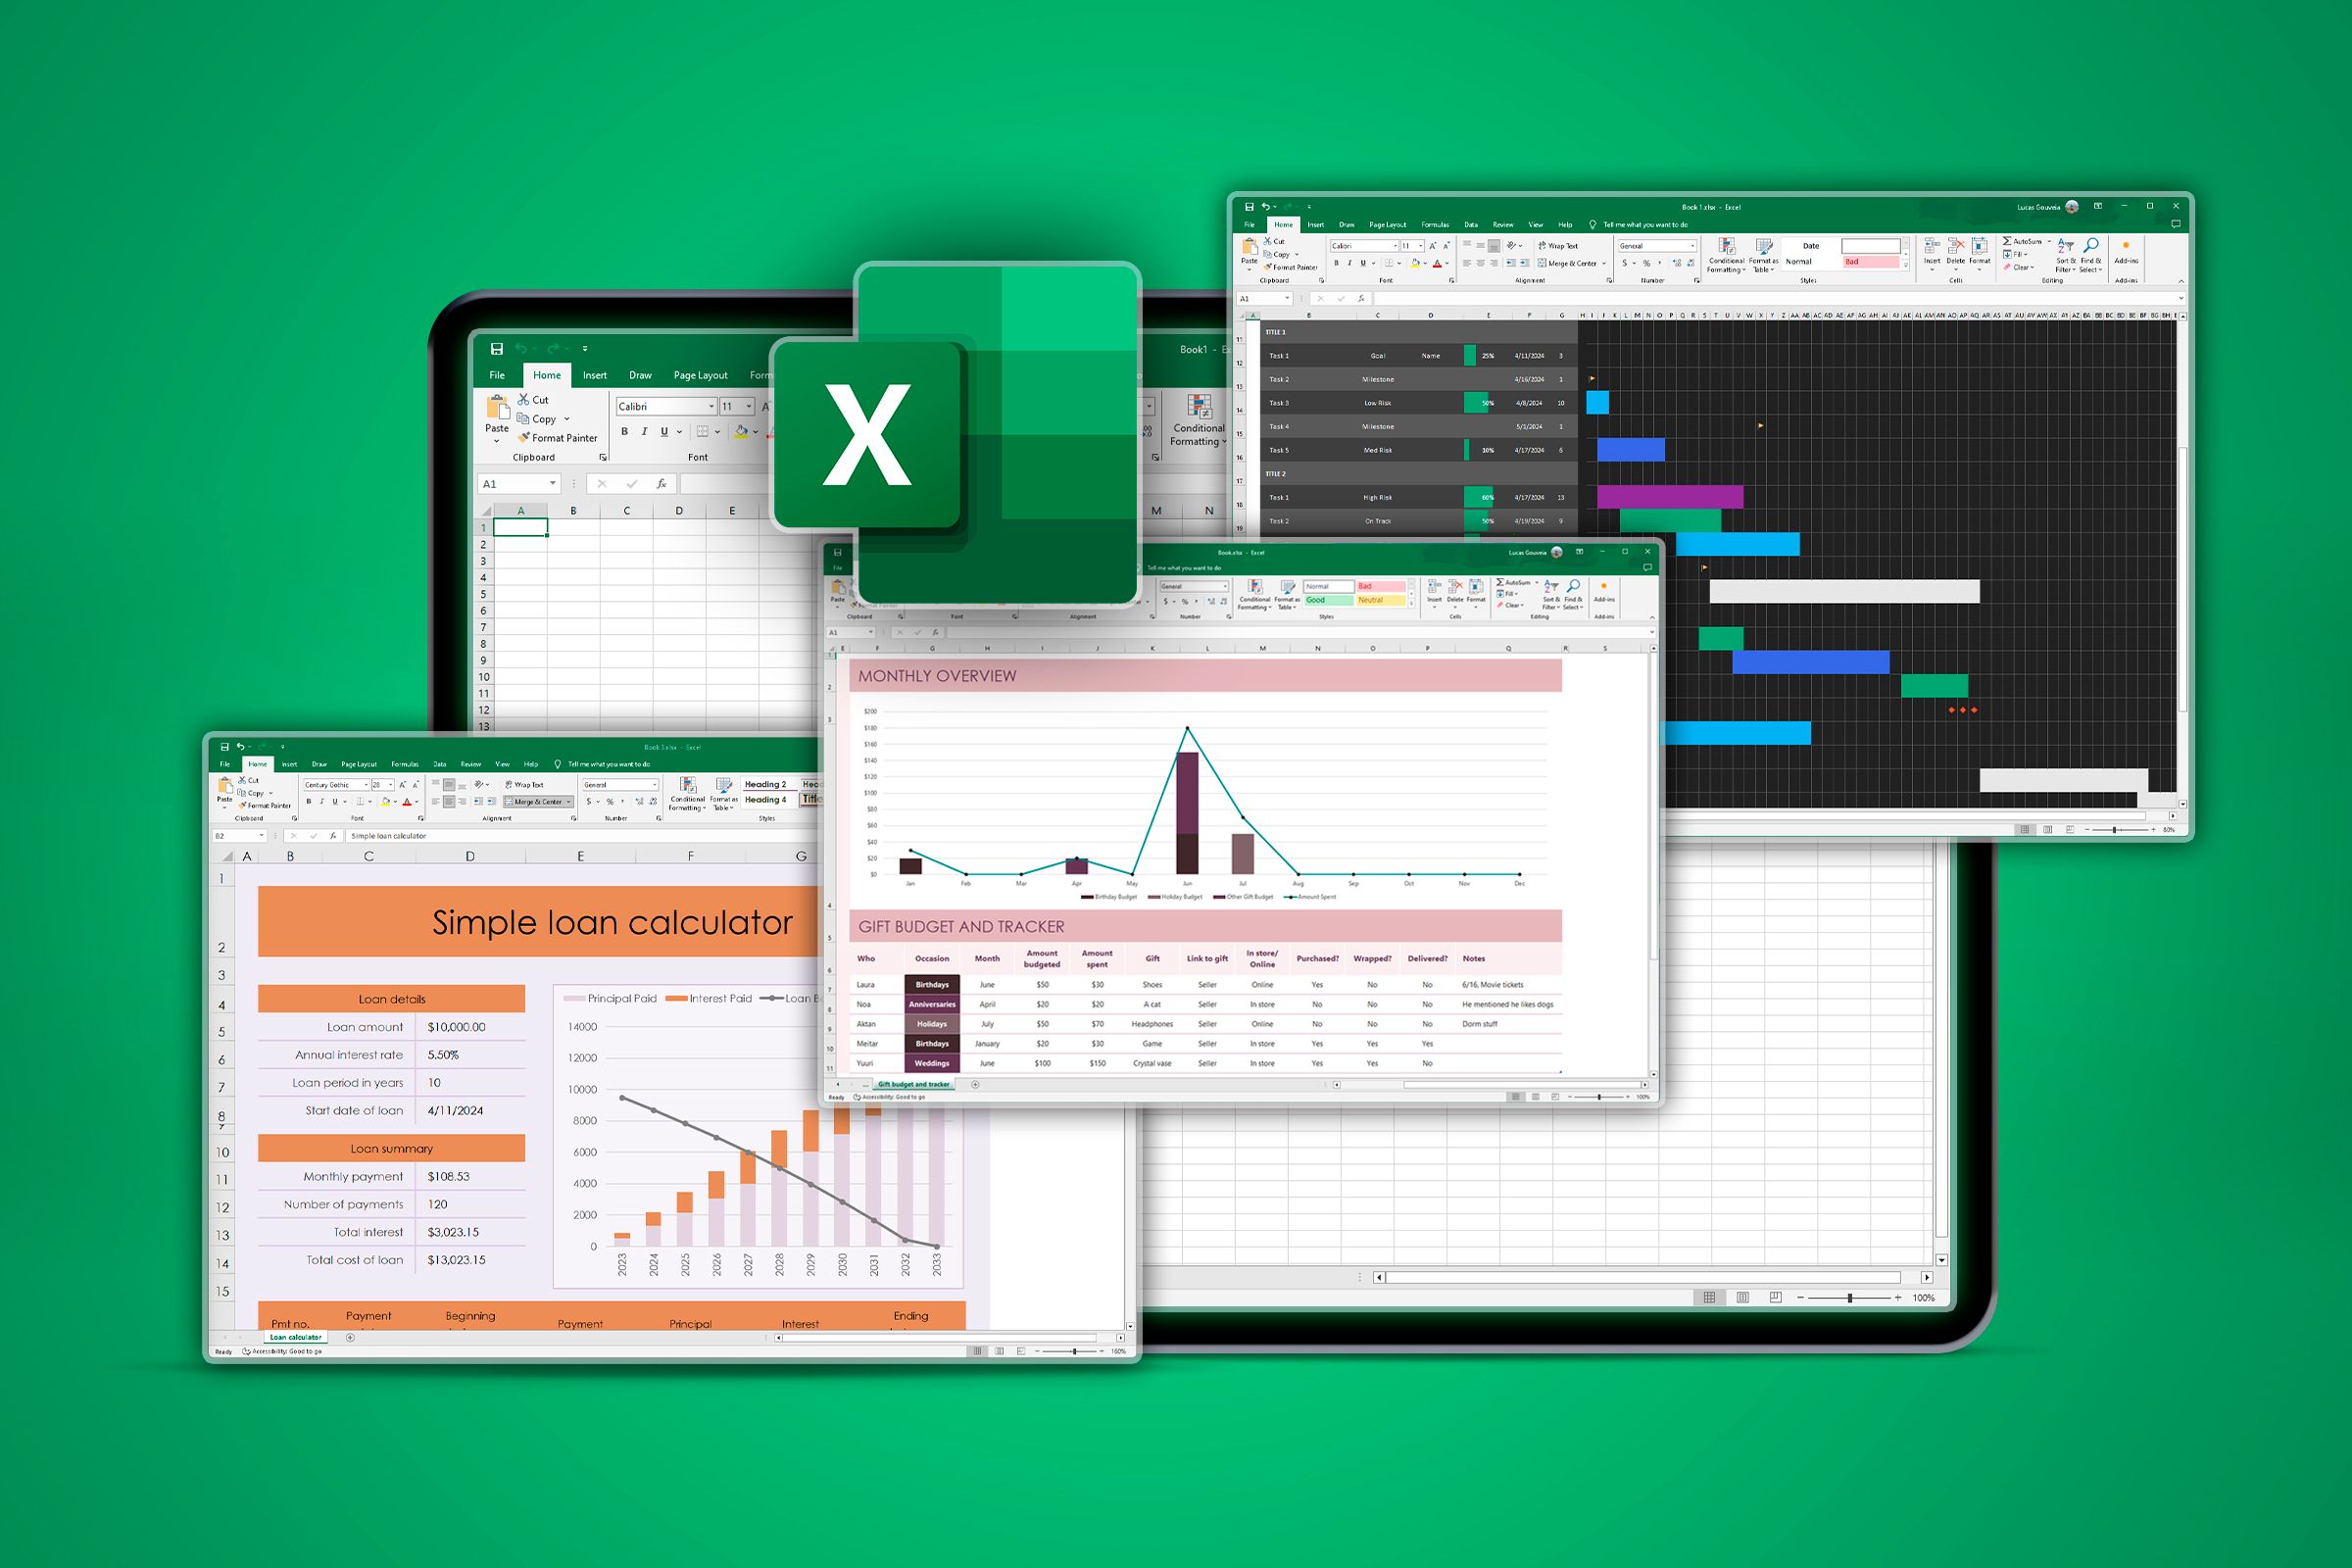 6 Ways to Make Your Excel Spreadsheet Easy to Read